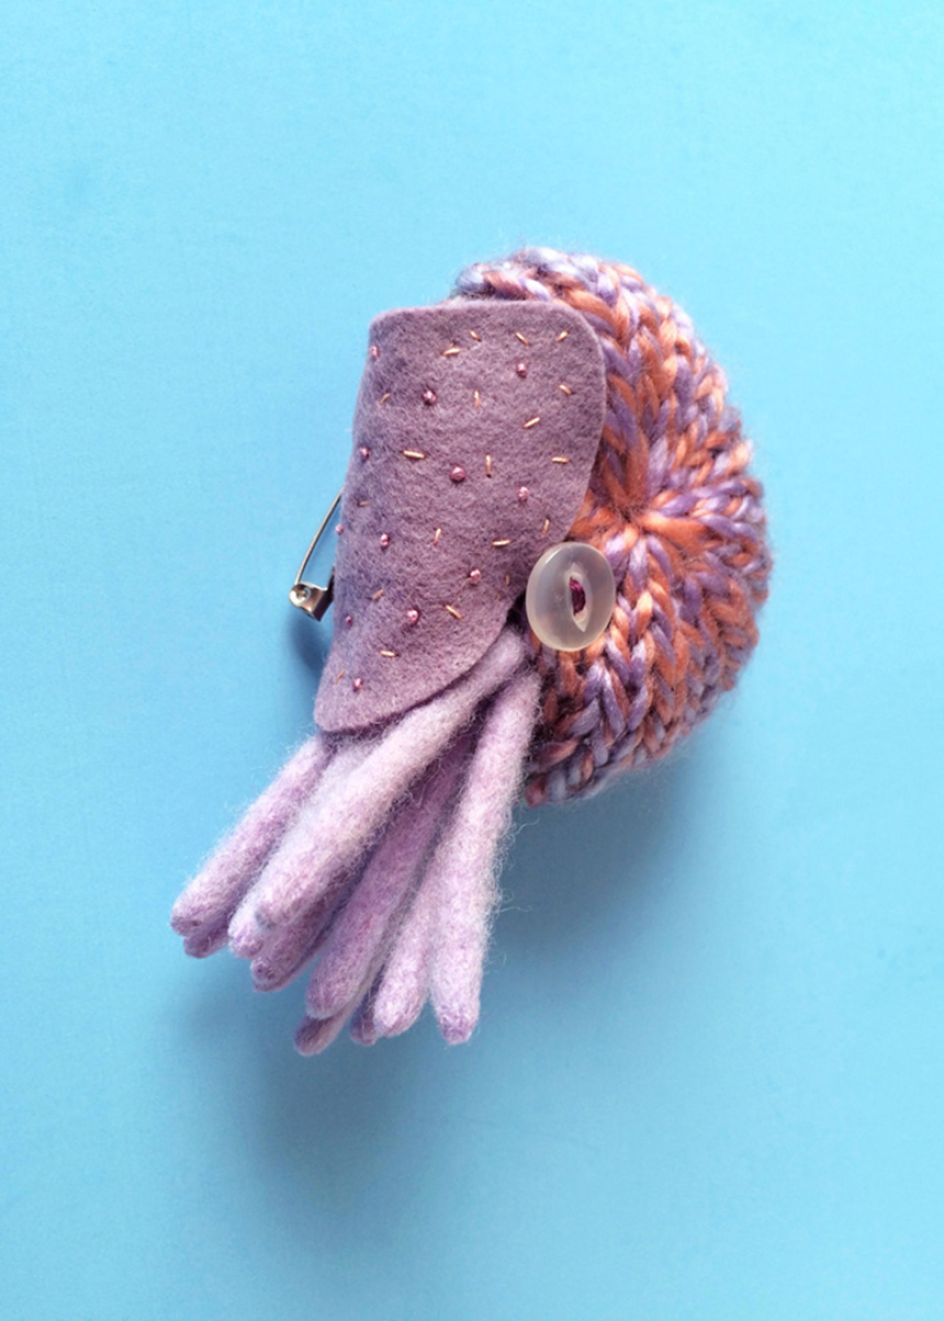 Nautilus Brooches: Wearable felt art of marine life crafted by Hiné ...